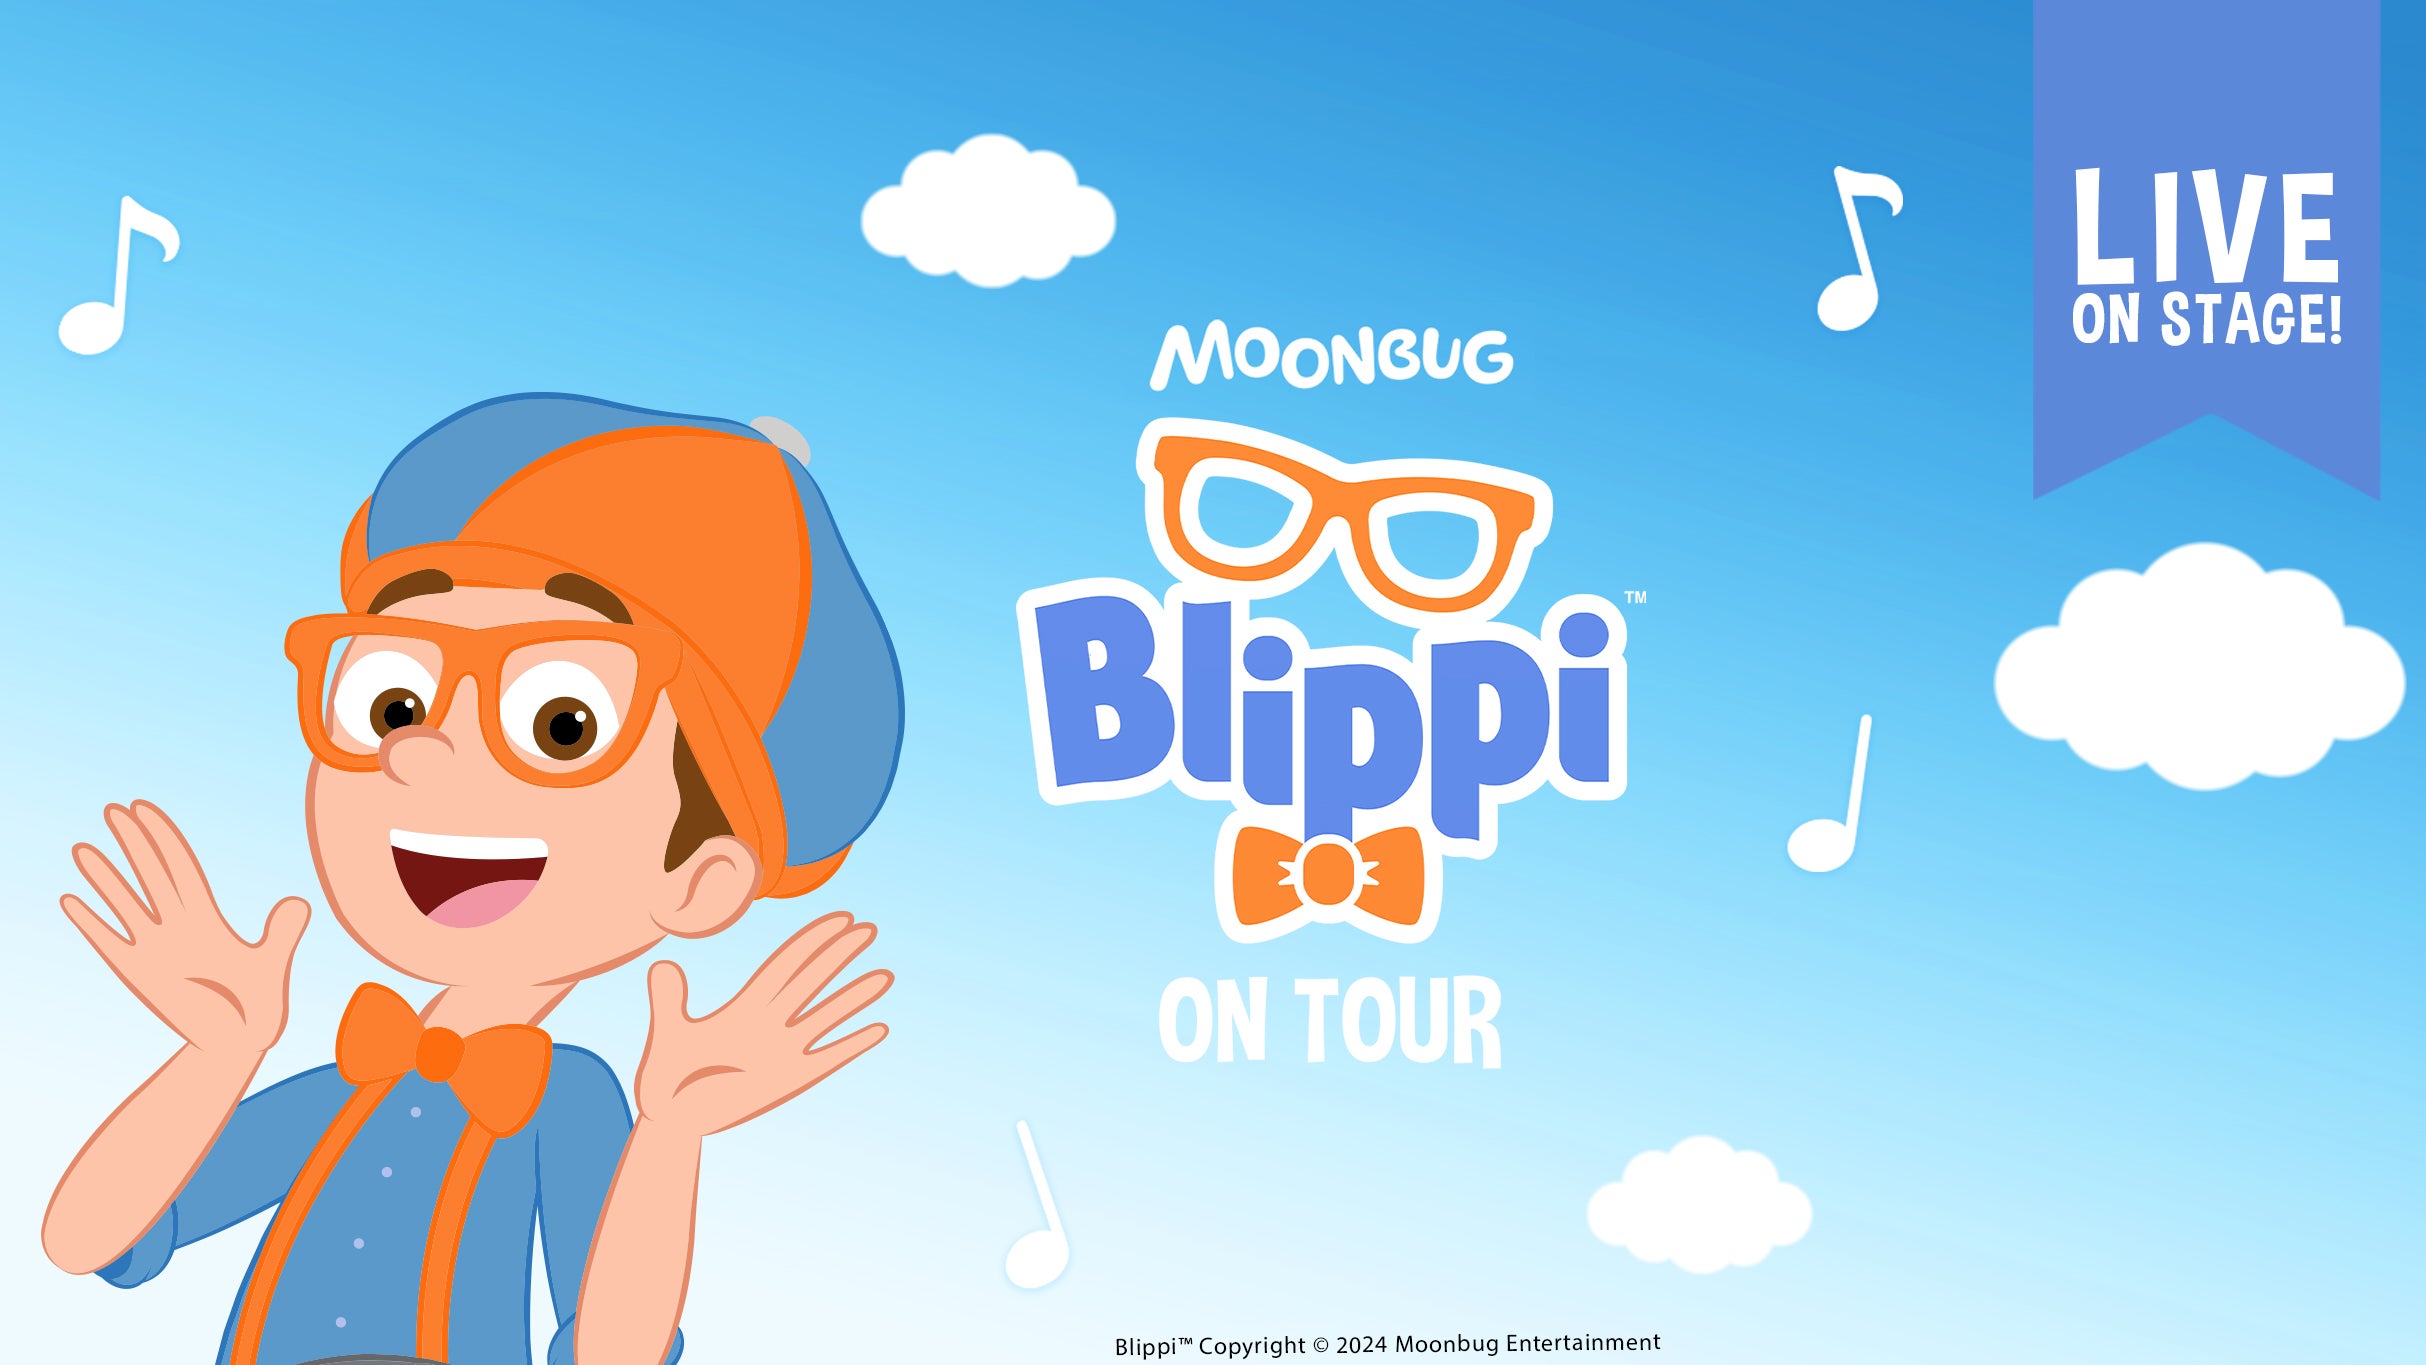 Blippi: Join The Band Tour! in Hershey promo photo for Official Platinum presale offer code